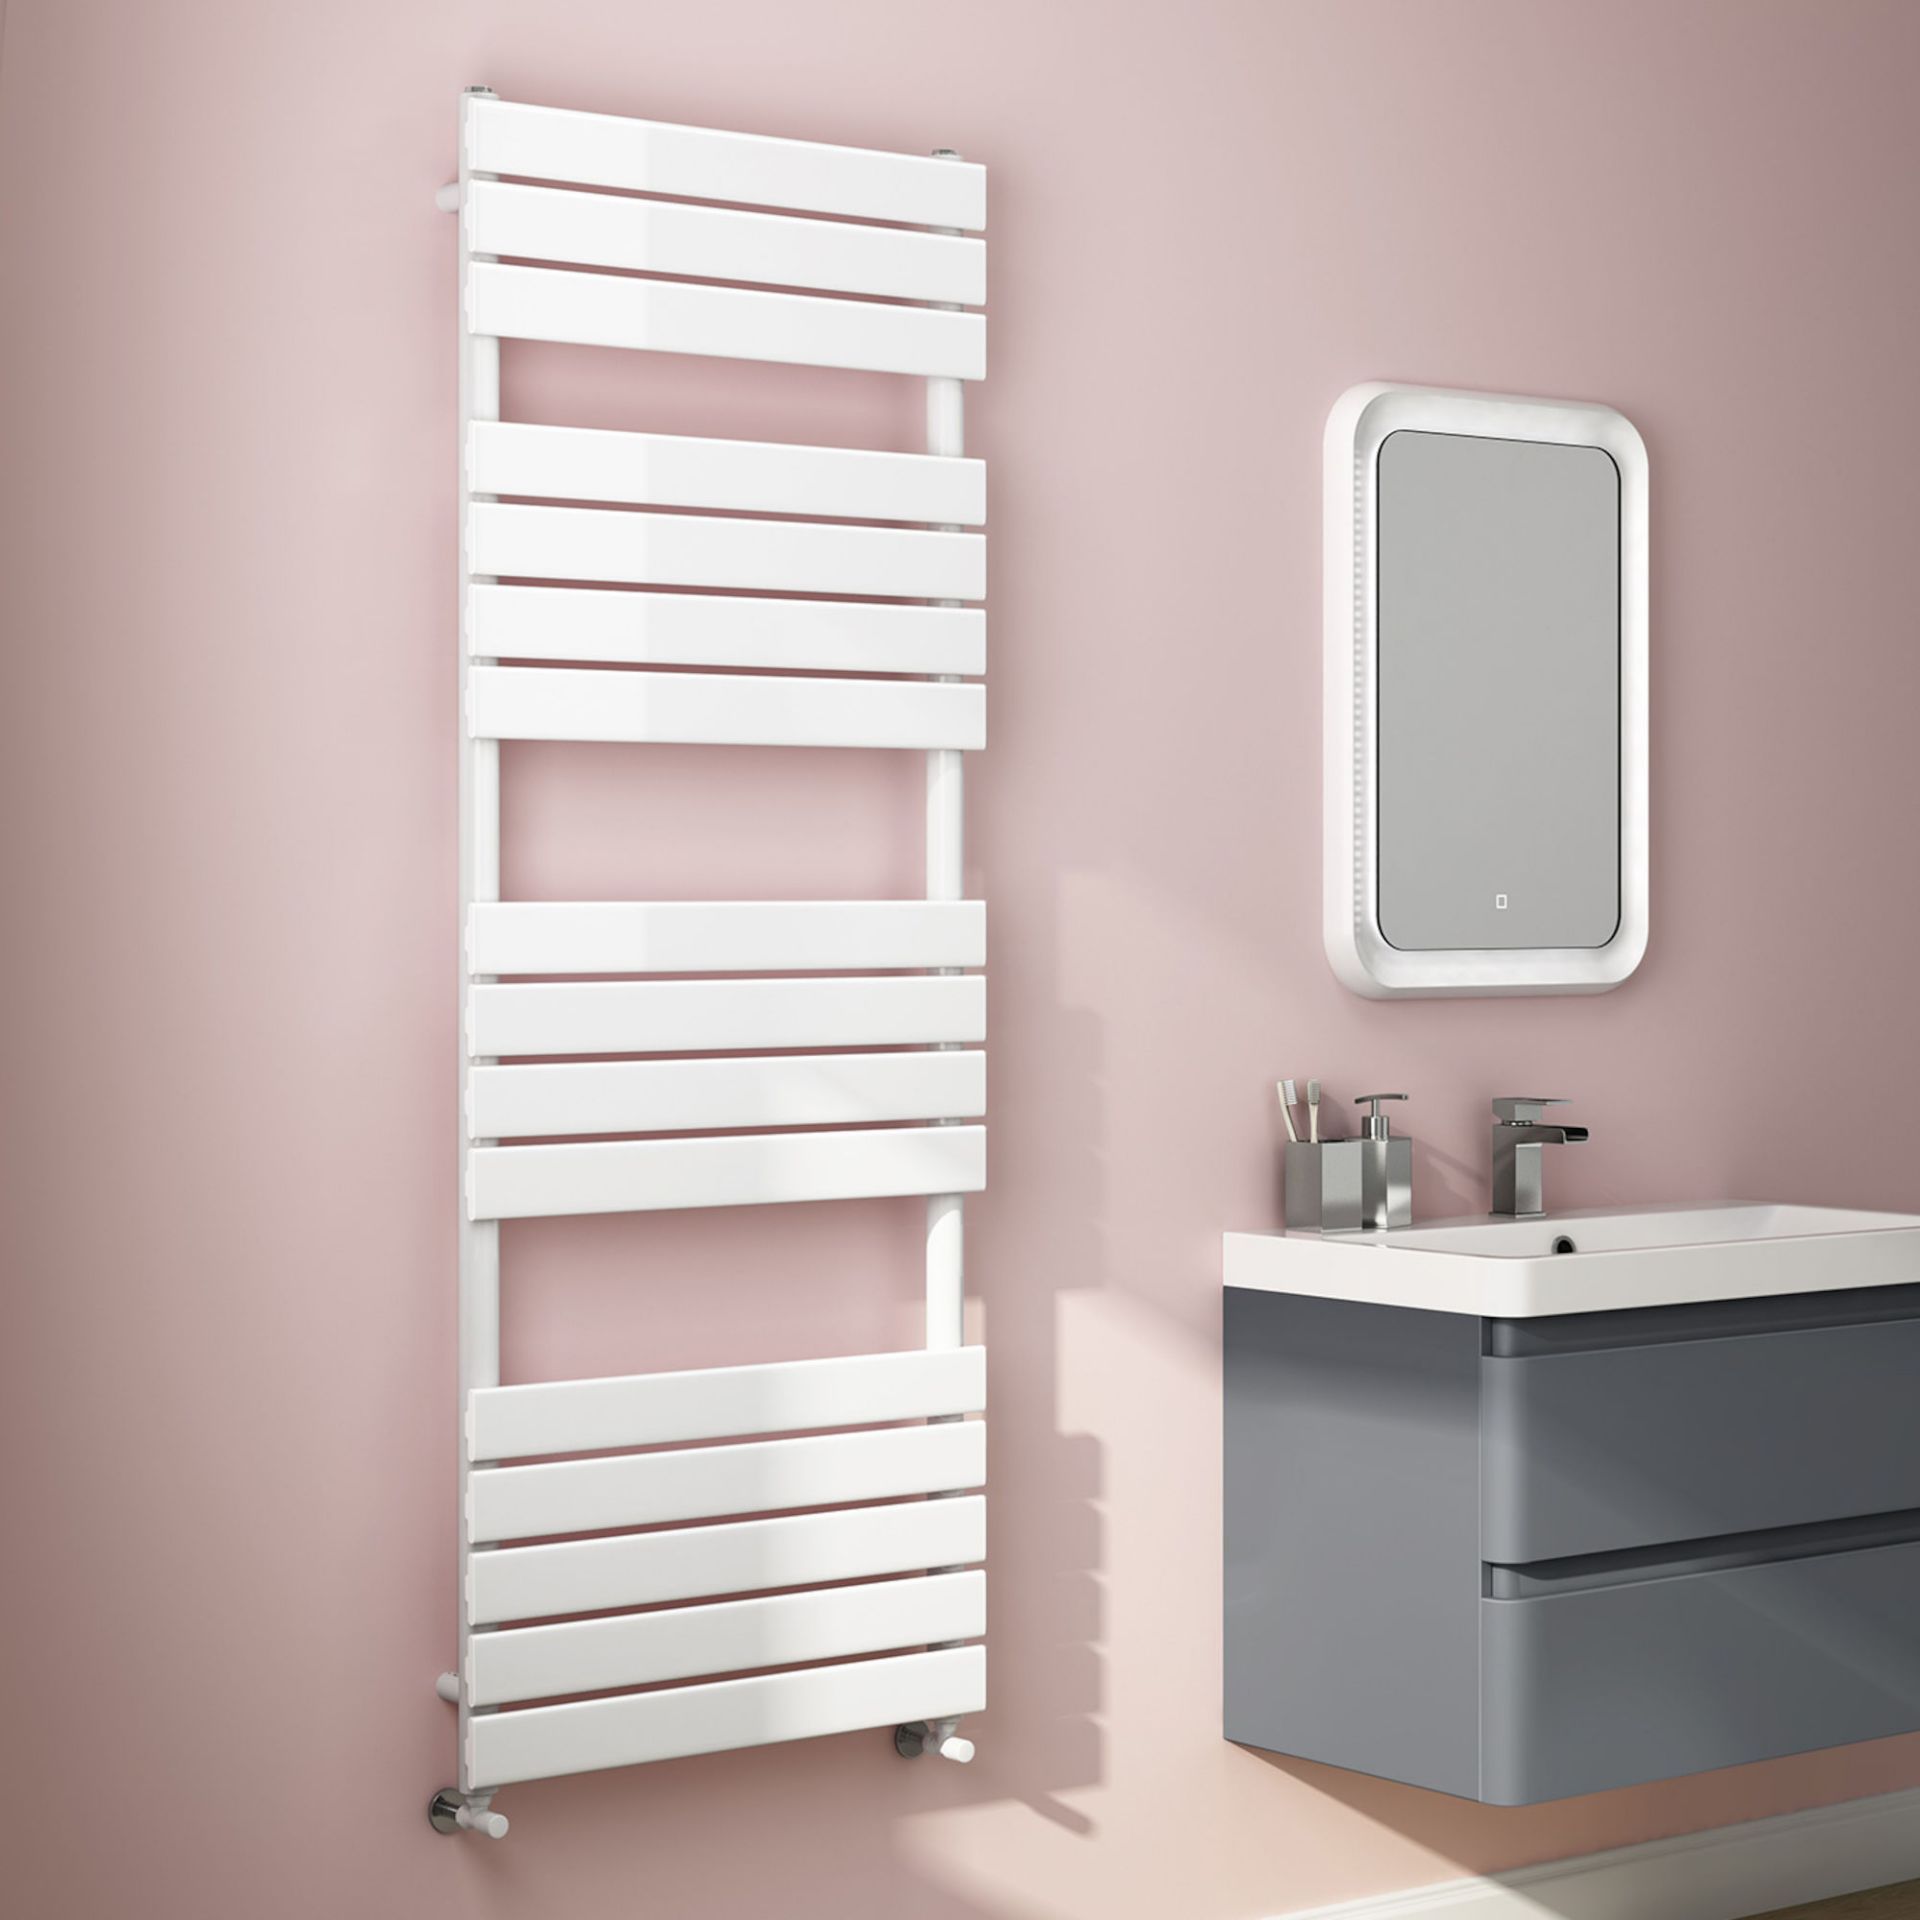 (Z52) 1600x600mm White Flat Panel Ladder Towel Radiator. RRP £354.99. we use low carbon steel...